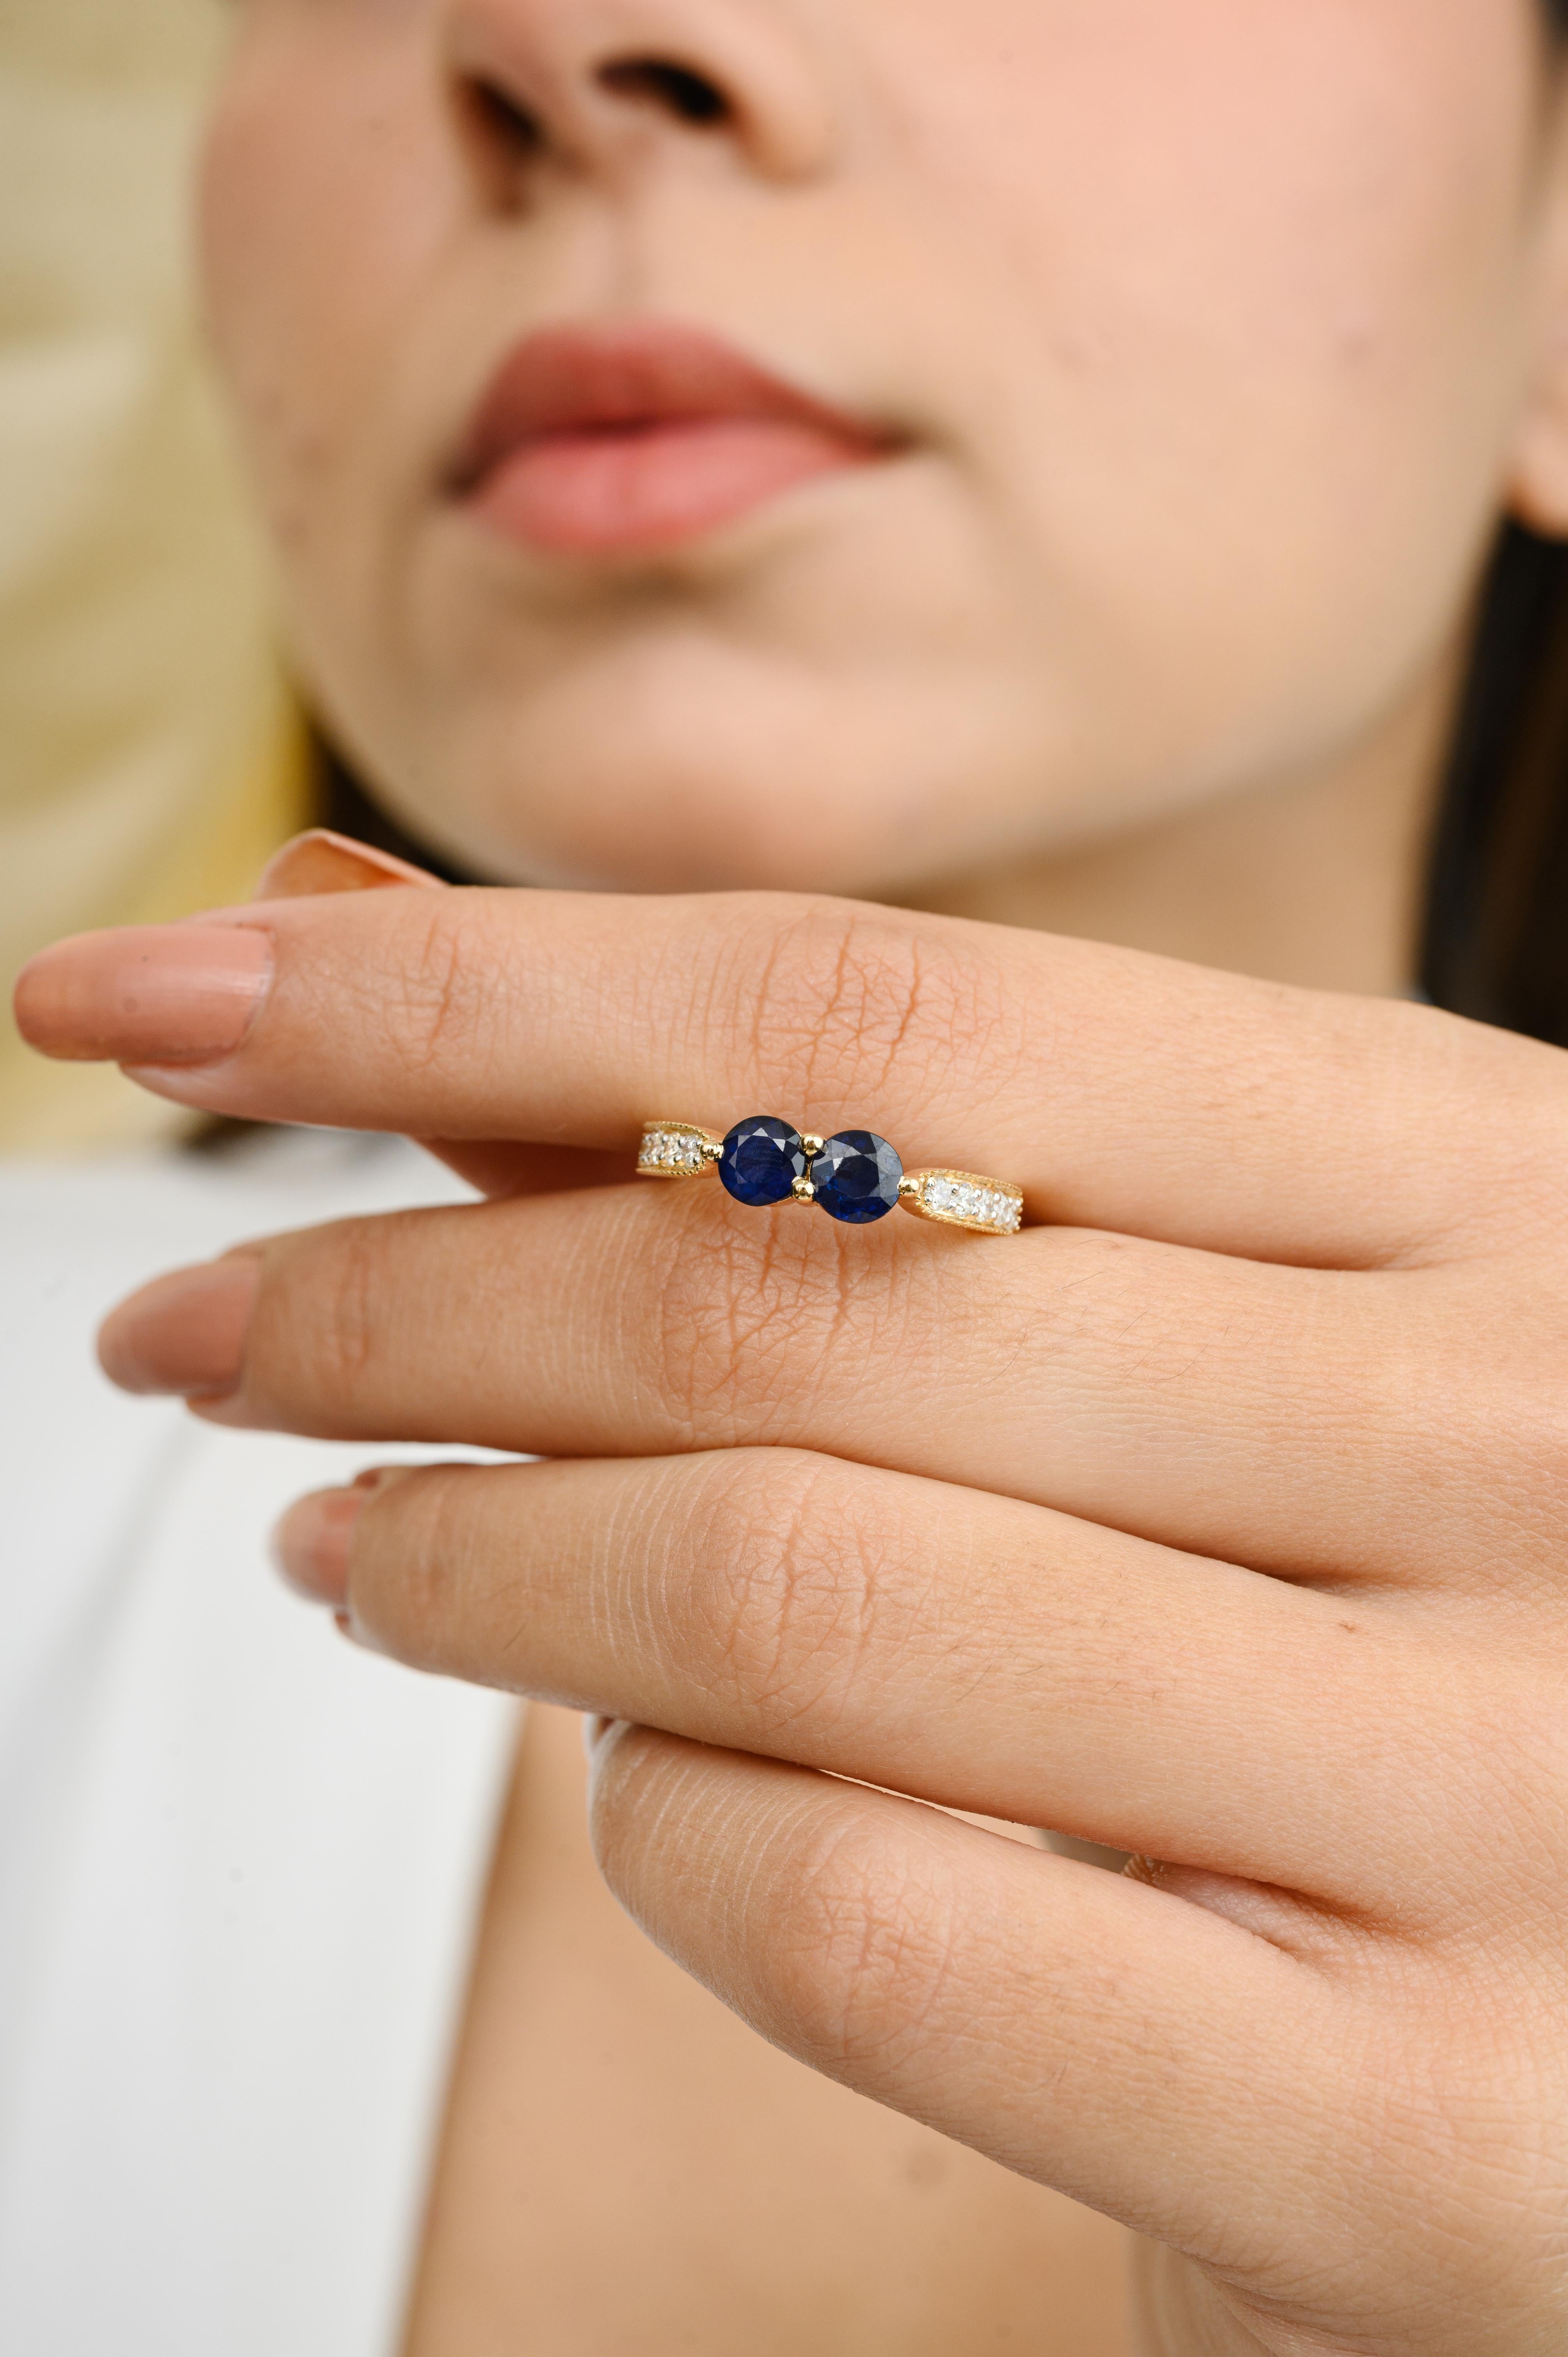 For Sale:  18k Solid Yellow Gold Two Stone Blue Sapphire Diamond Ring Wedding Gift for Her 2